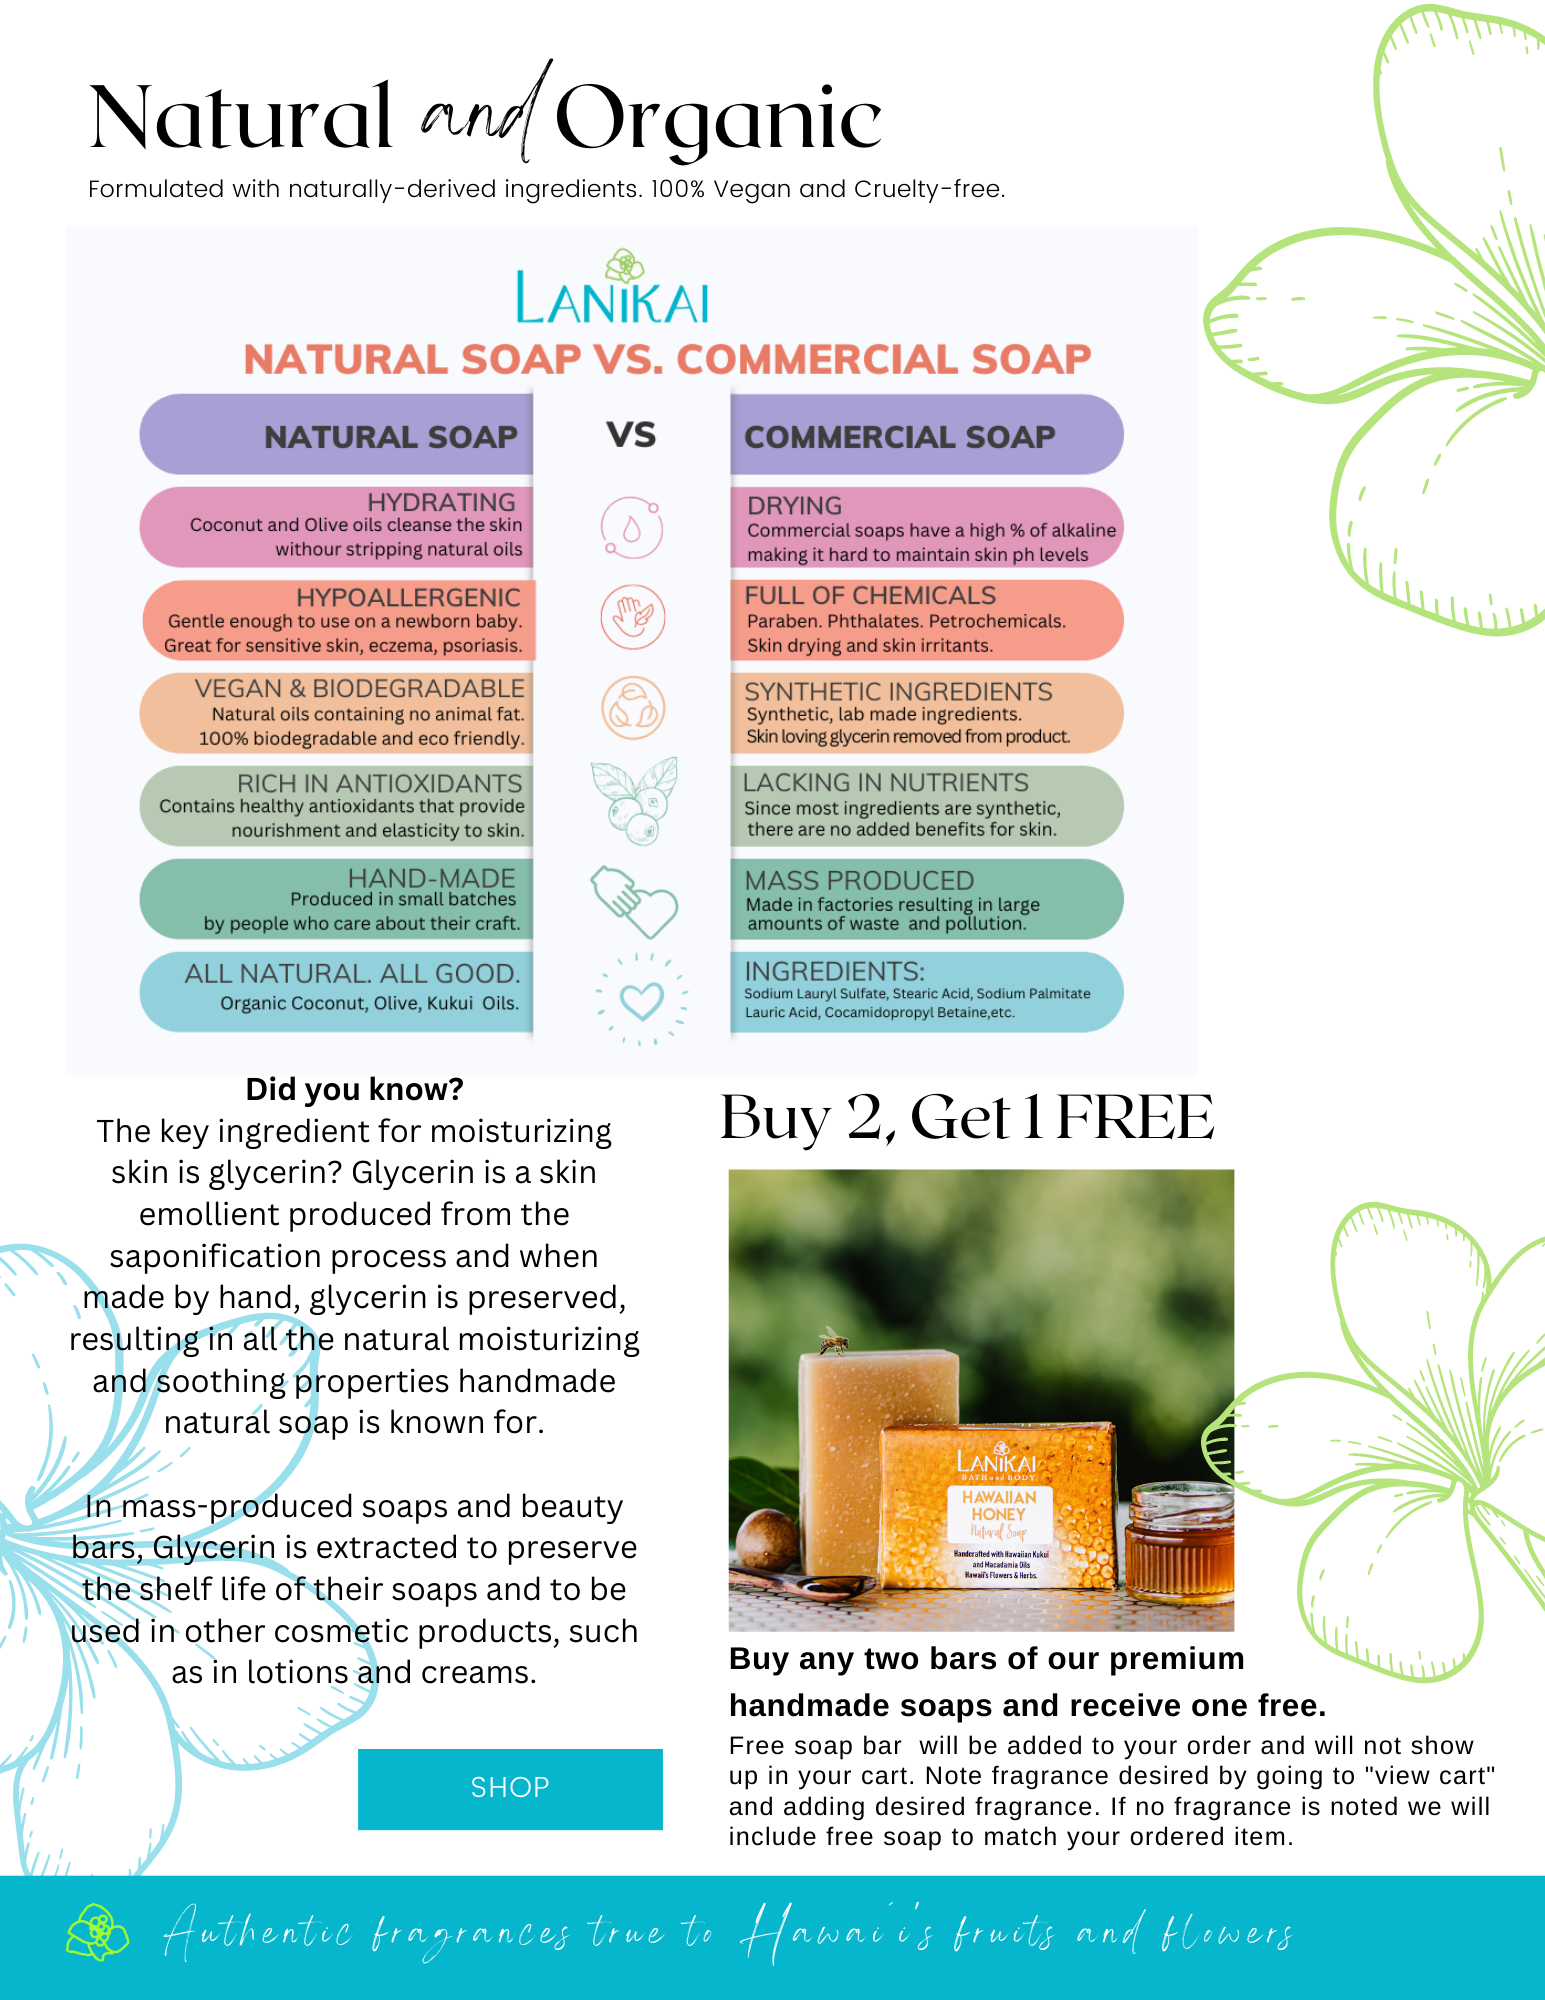 Buy Two Soaps, Get one Free!